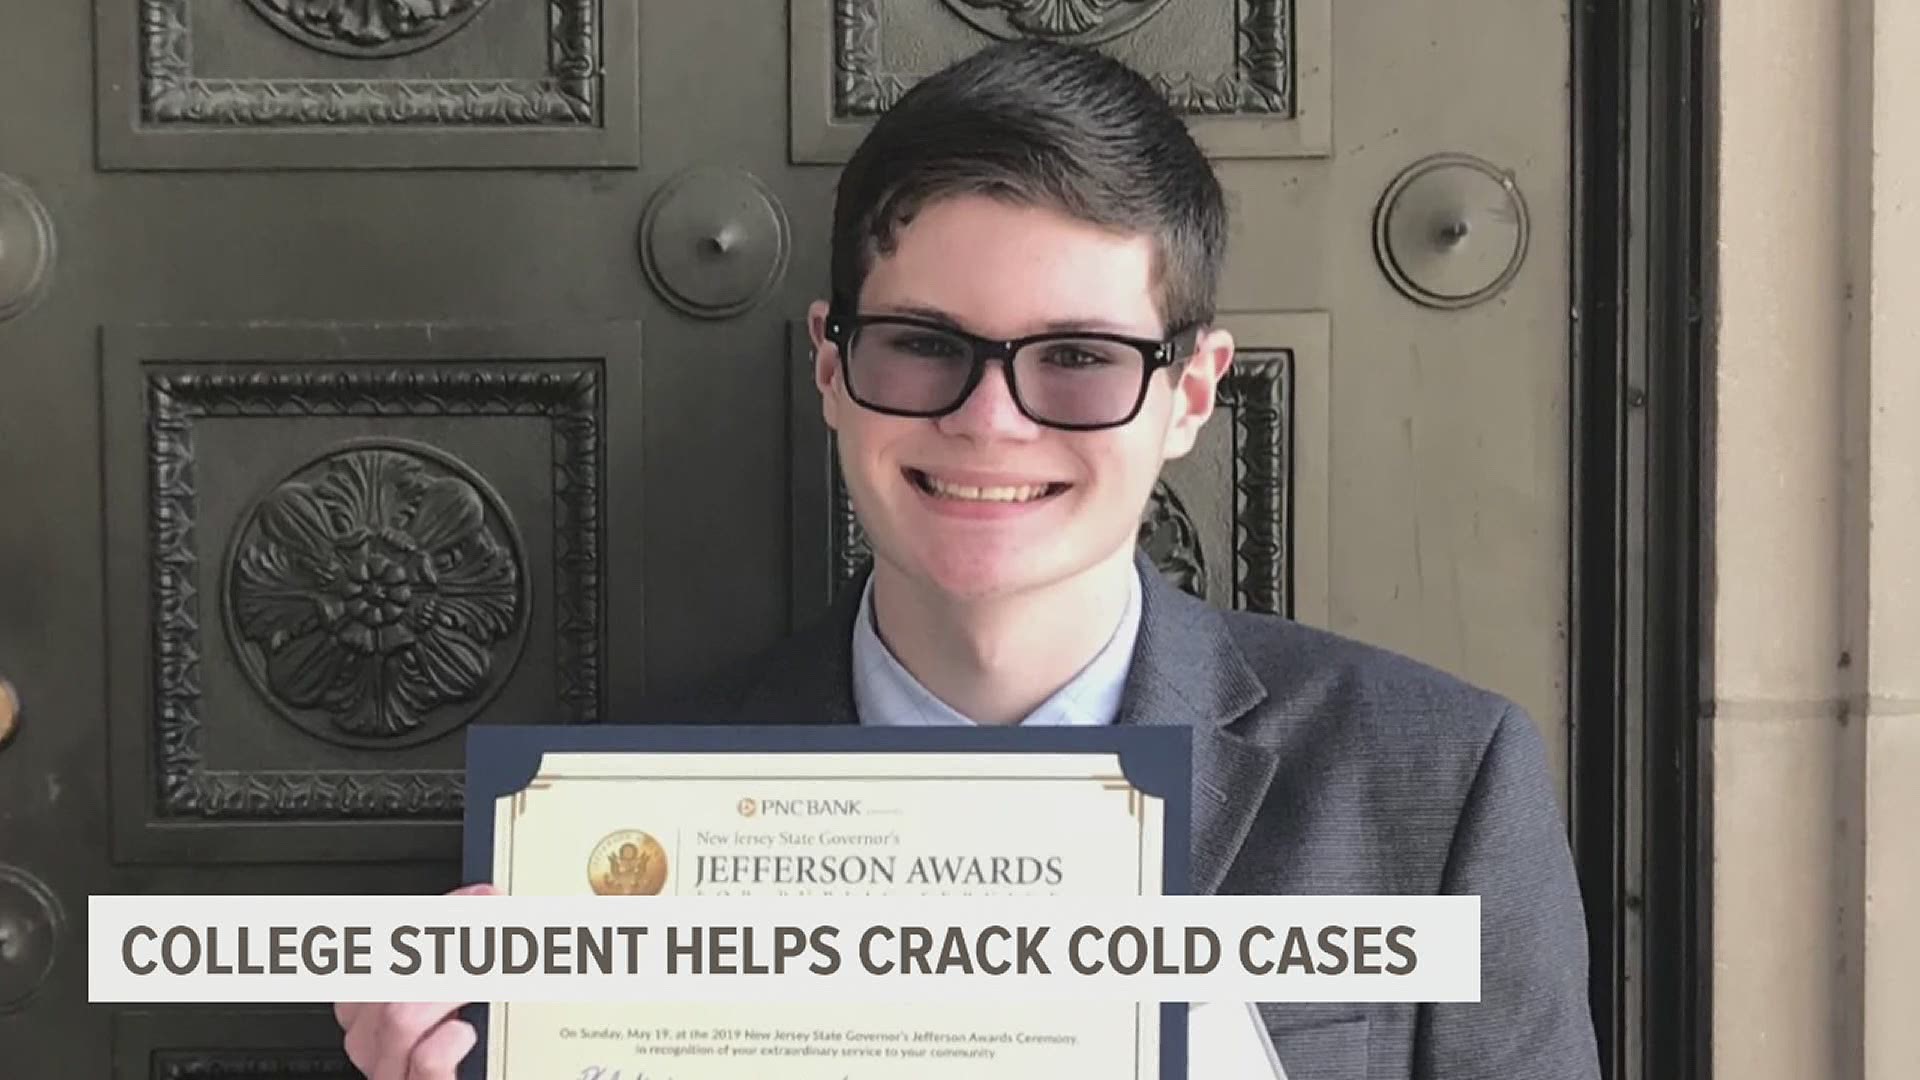 The week he graduated high school, Eric received an email from a police department in Montgomery County, Pa asking for his help on a cold case.